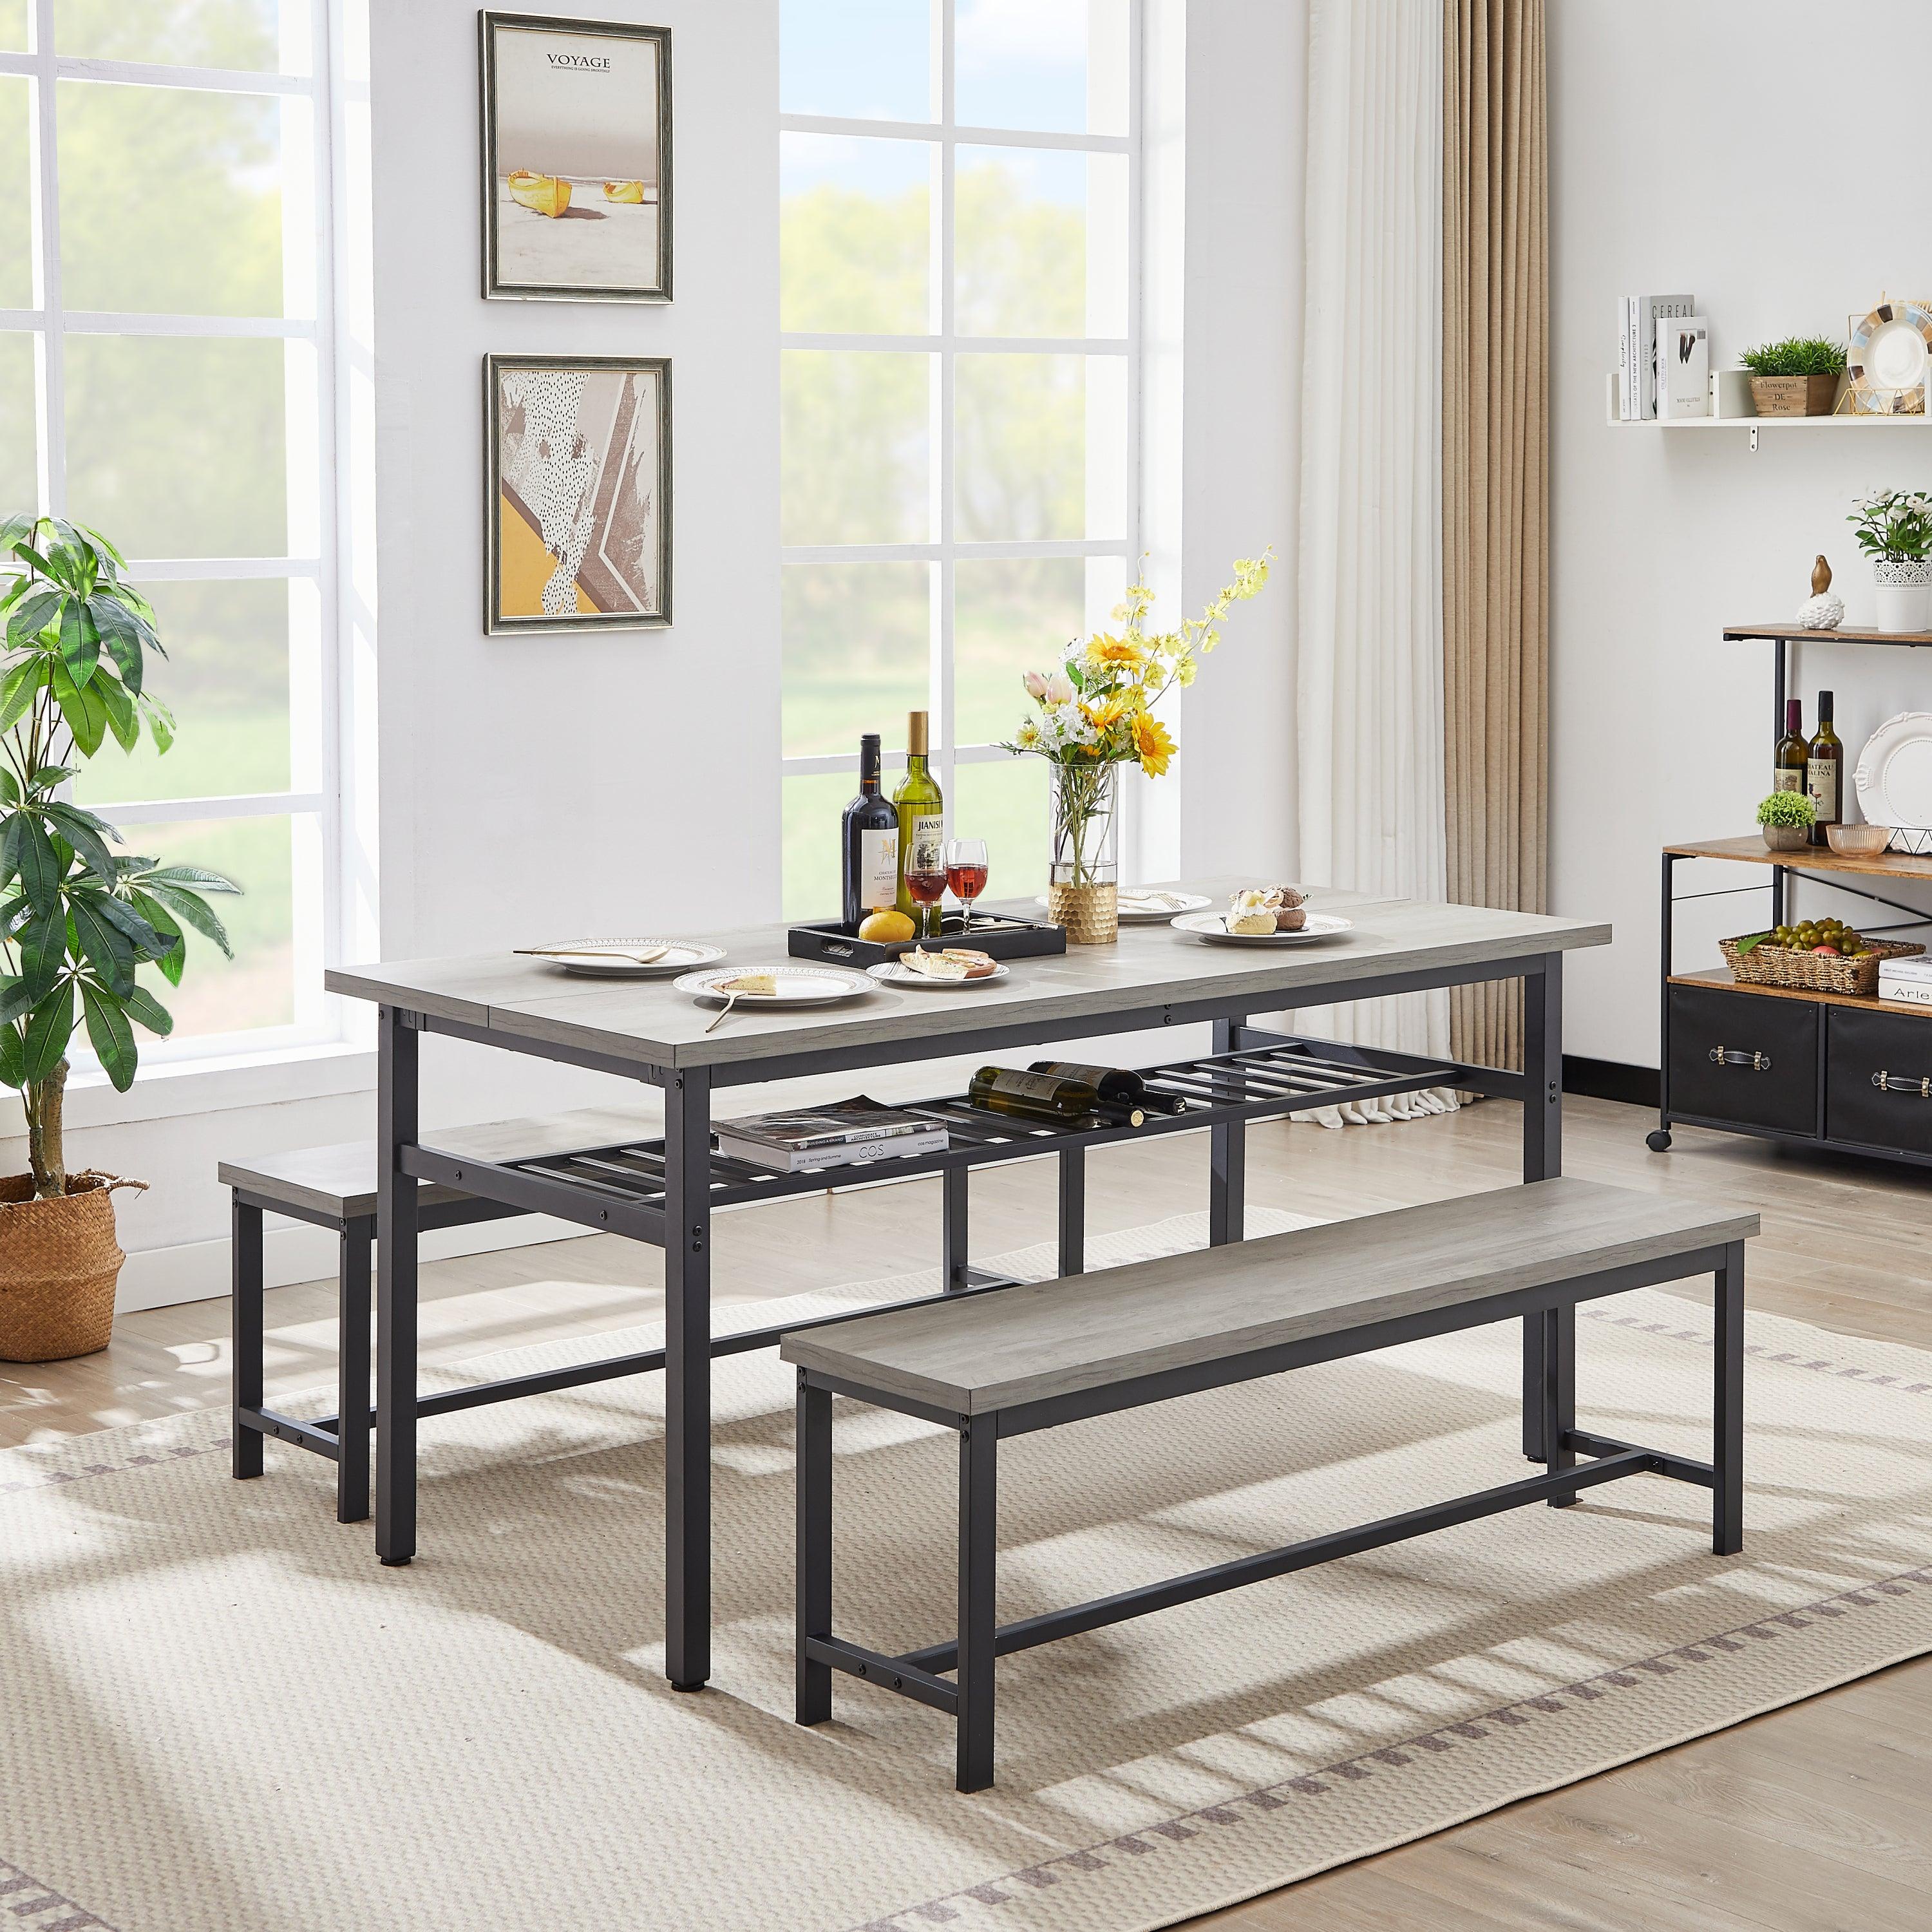 🆓🚛 Oversized Dining Table Set for 6, 3-Piece Kitchen Table With 2 Benches, Dining Room Table Set for Home Kitchen, Restaurant, Rustic Gray, 67'' L X 31.5'' W X 31.7'' H.